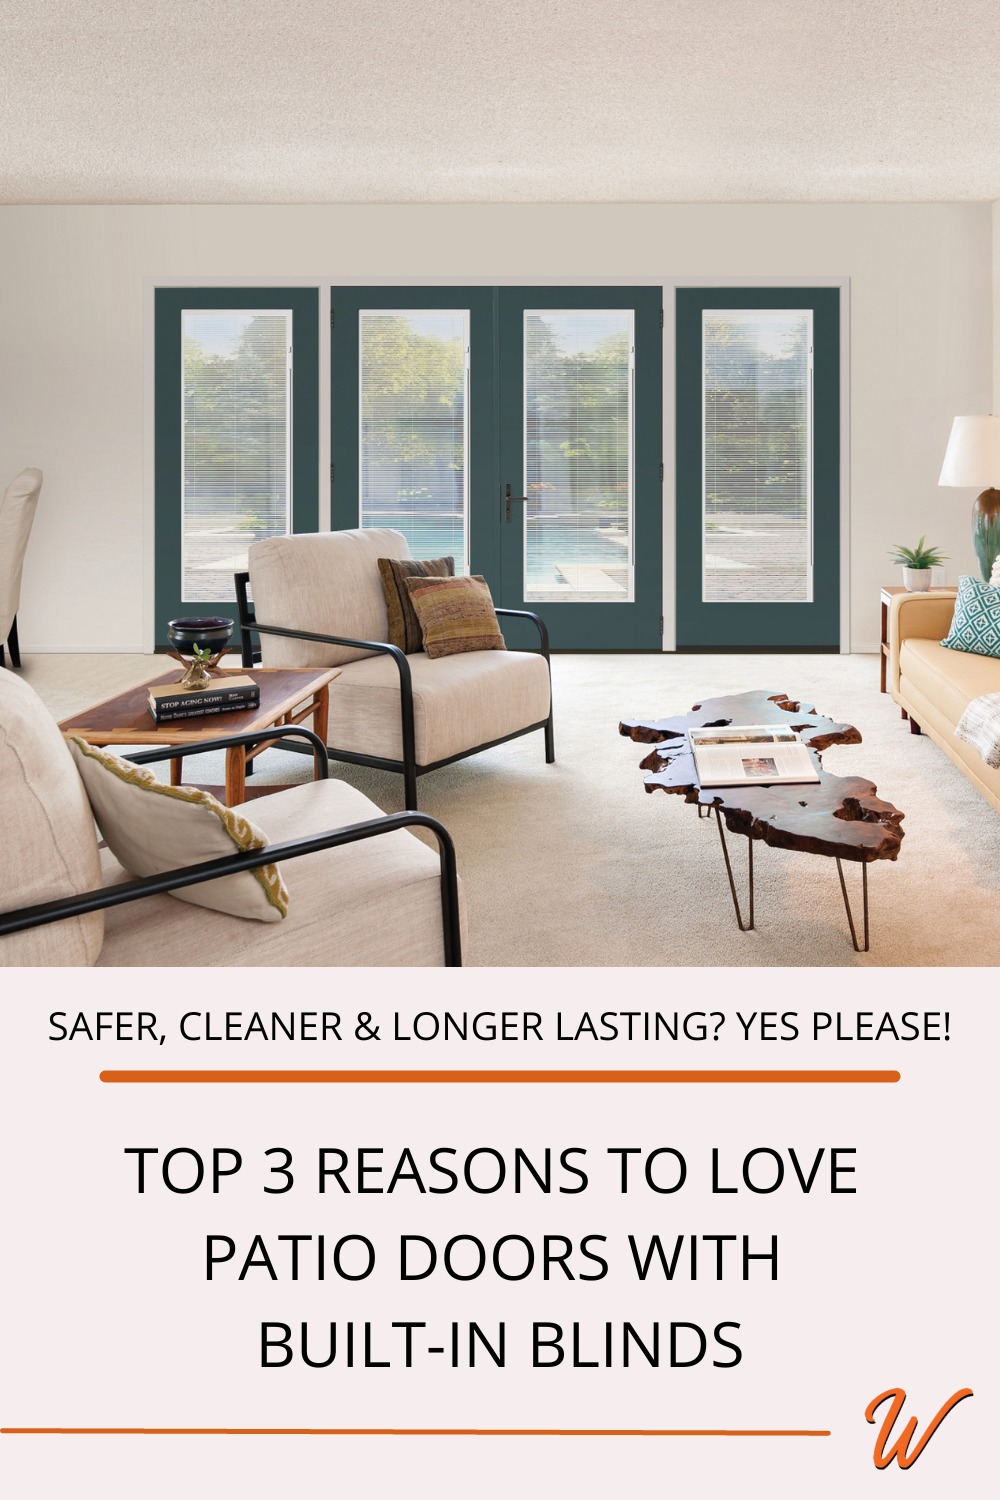 a living room interior with a 4 panel patio door with built in blinds captioned with "safer, cleaner, and longer lasting? Yes please! Top 3 reasons to love patio doors with built-in blinds"